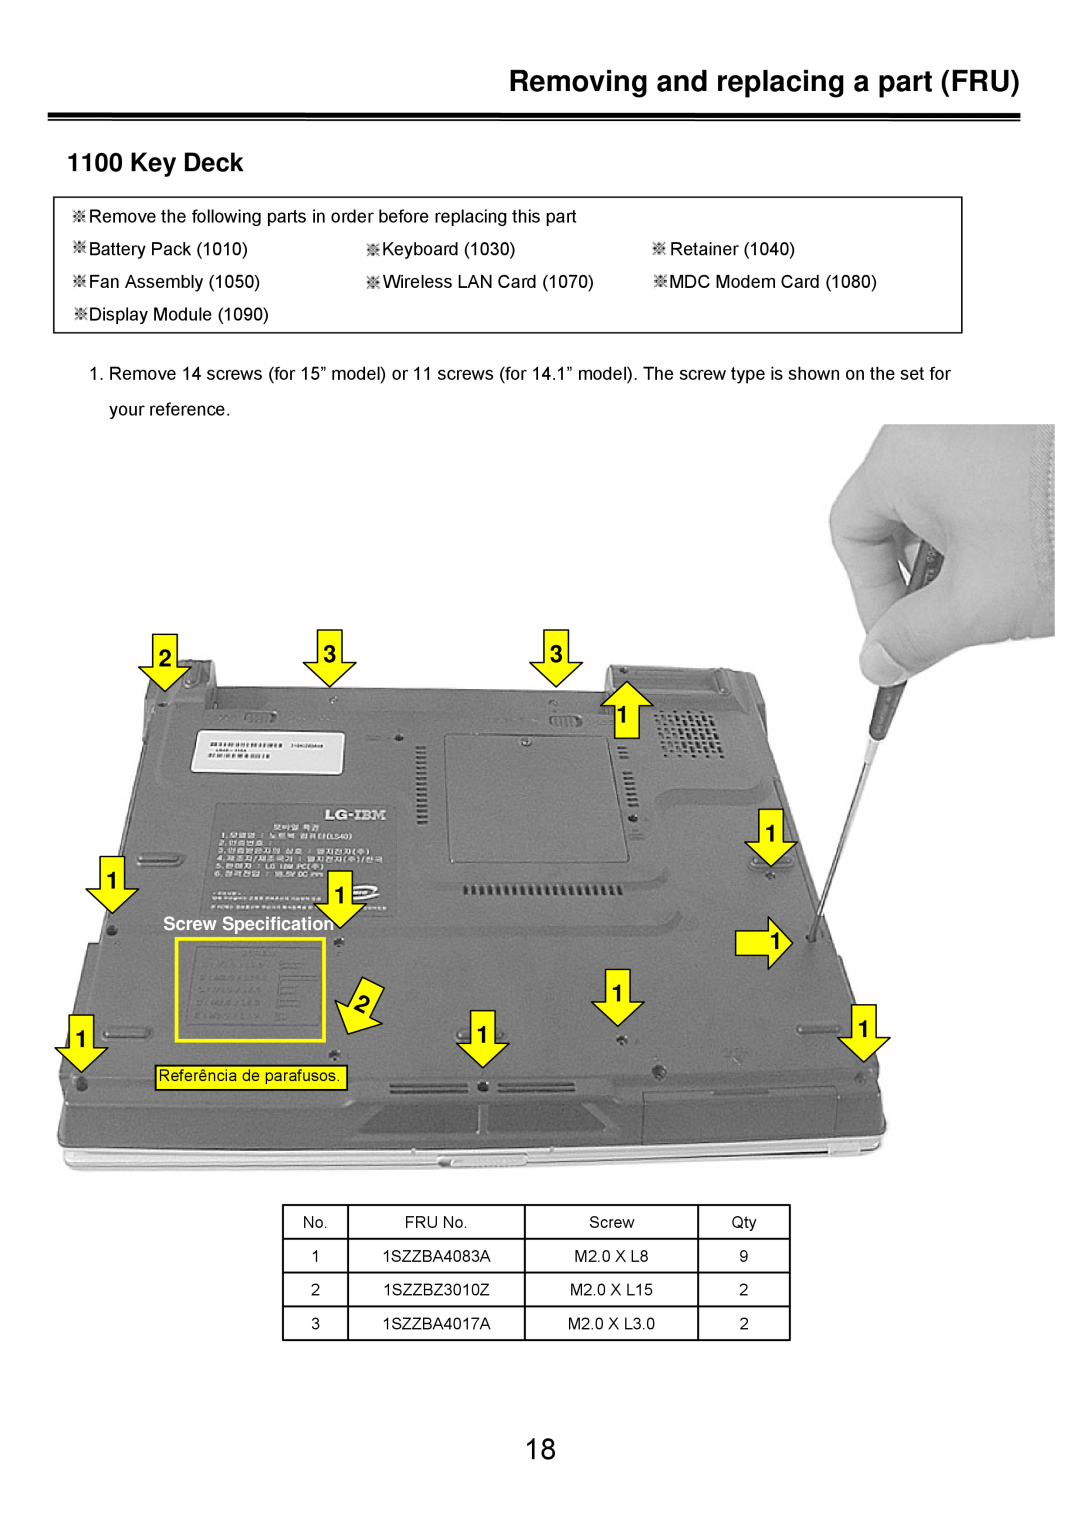 LG Electronics LS50 service manual Key Deck, Removing and replacing a part FRU, Screw Specification 